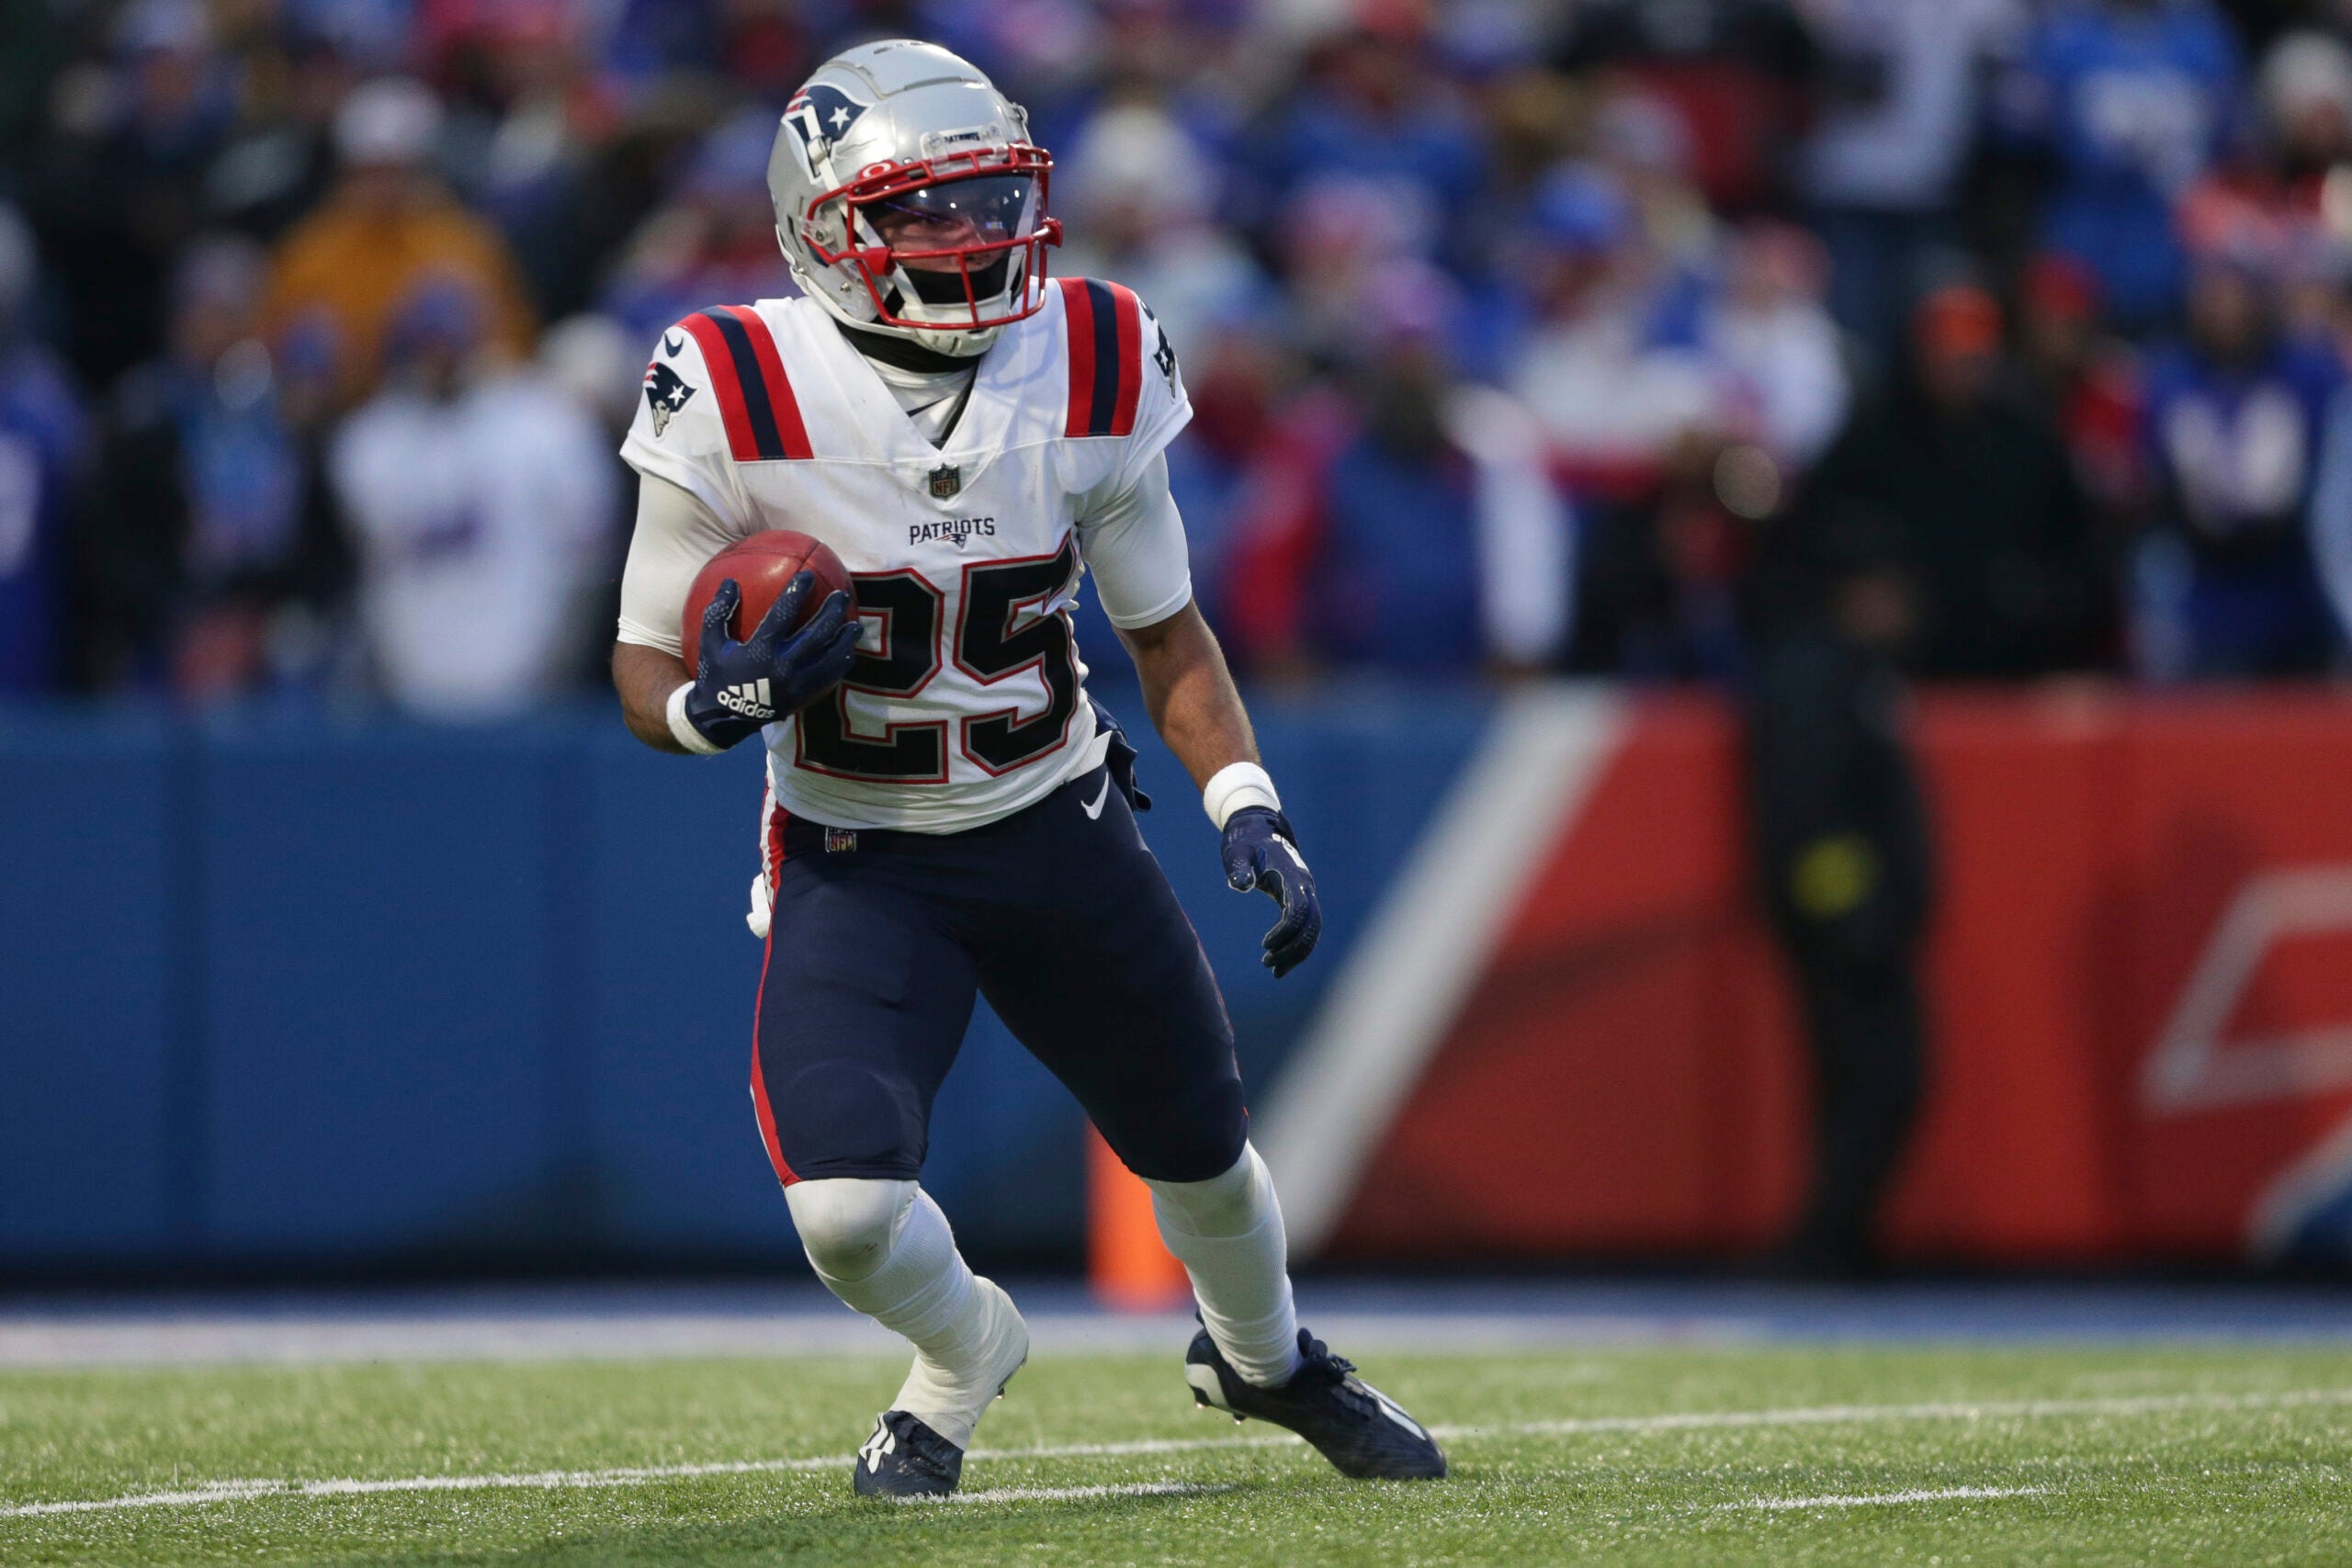 New England Patriots cornerback Marcus Jones (25) returns a kickoff during the second half of an NFL football game against the Buffalo Bills.